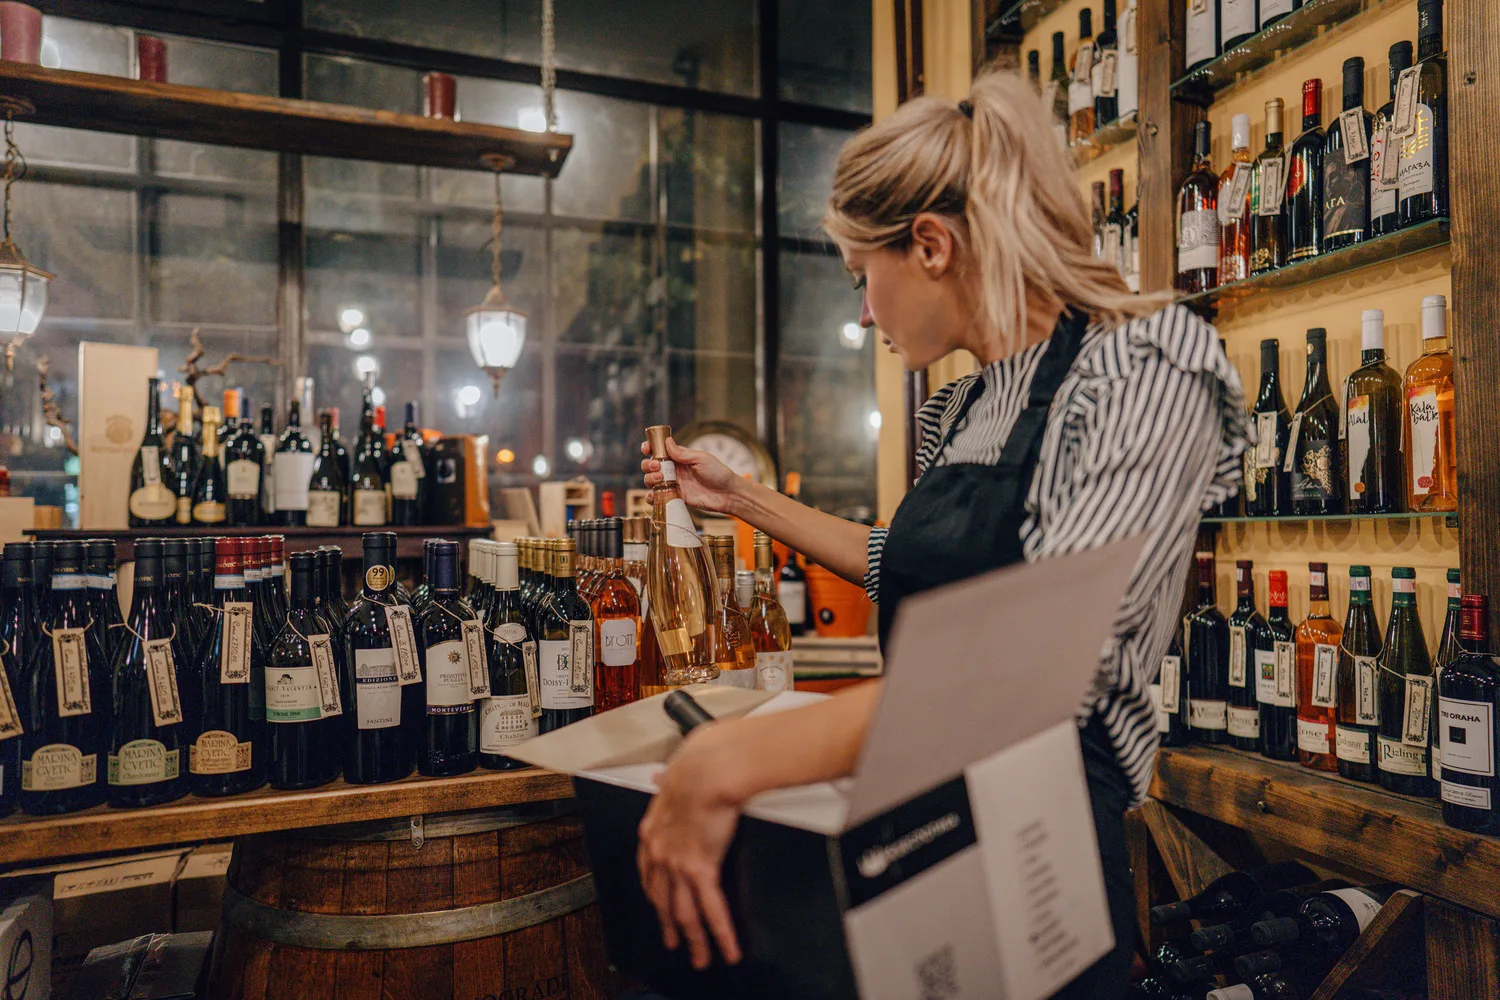 Women packing a box of wine in a wine shop surrounded by bottles of wine